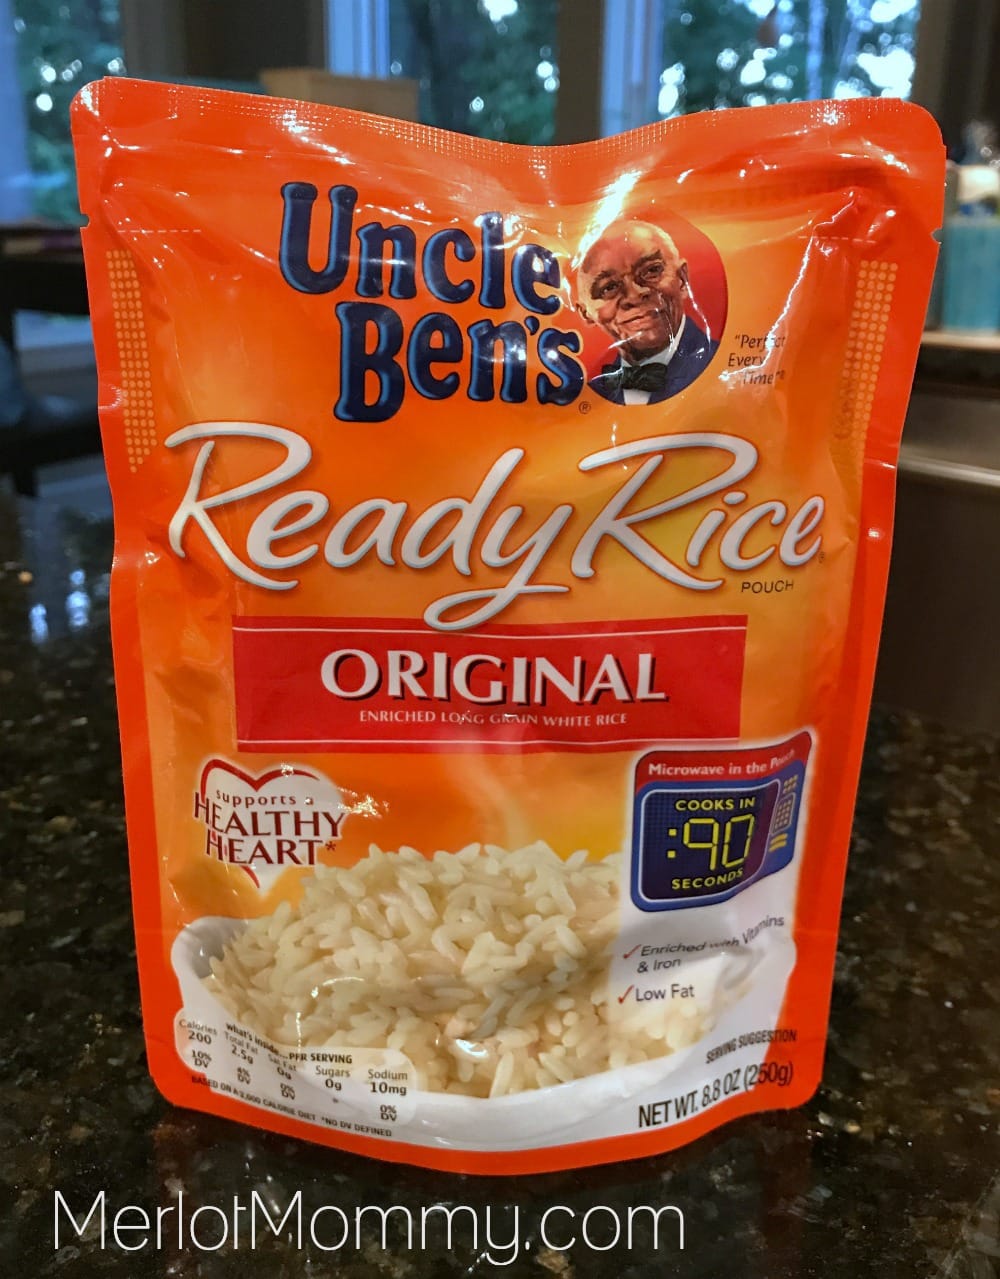 Cooking with Kids and Uncle Bens